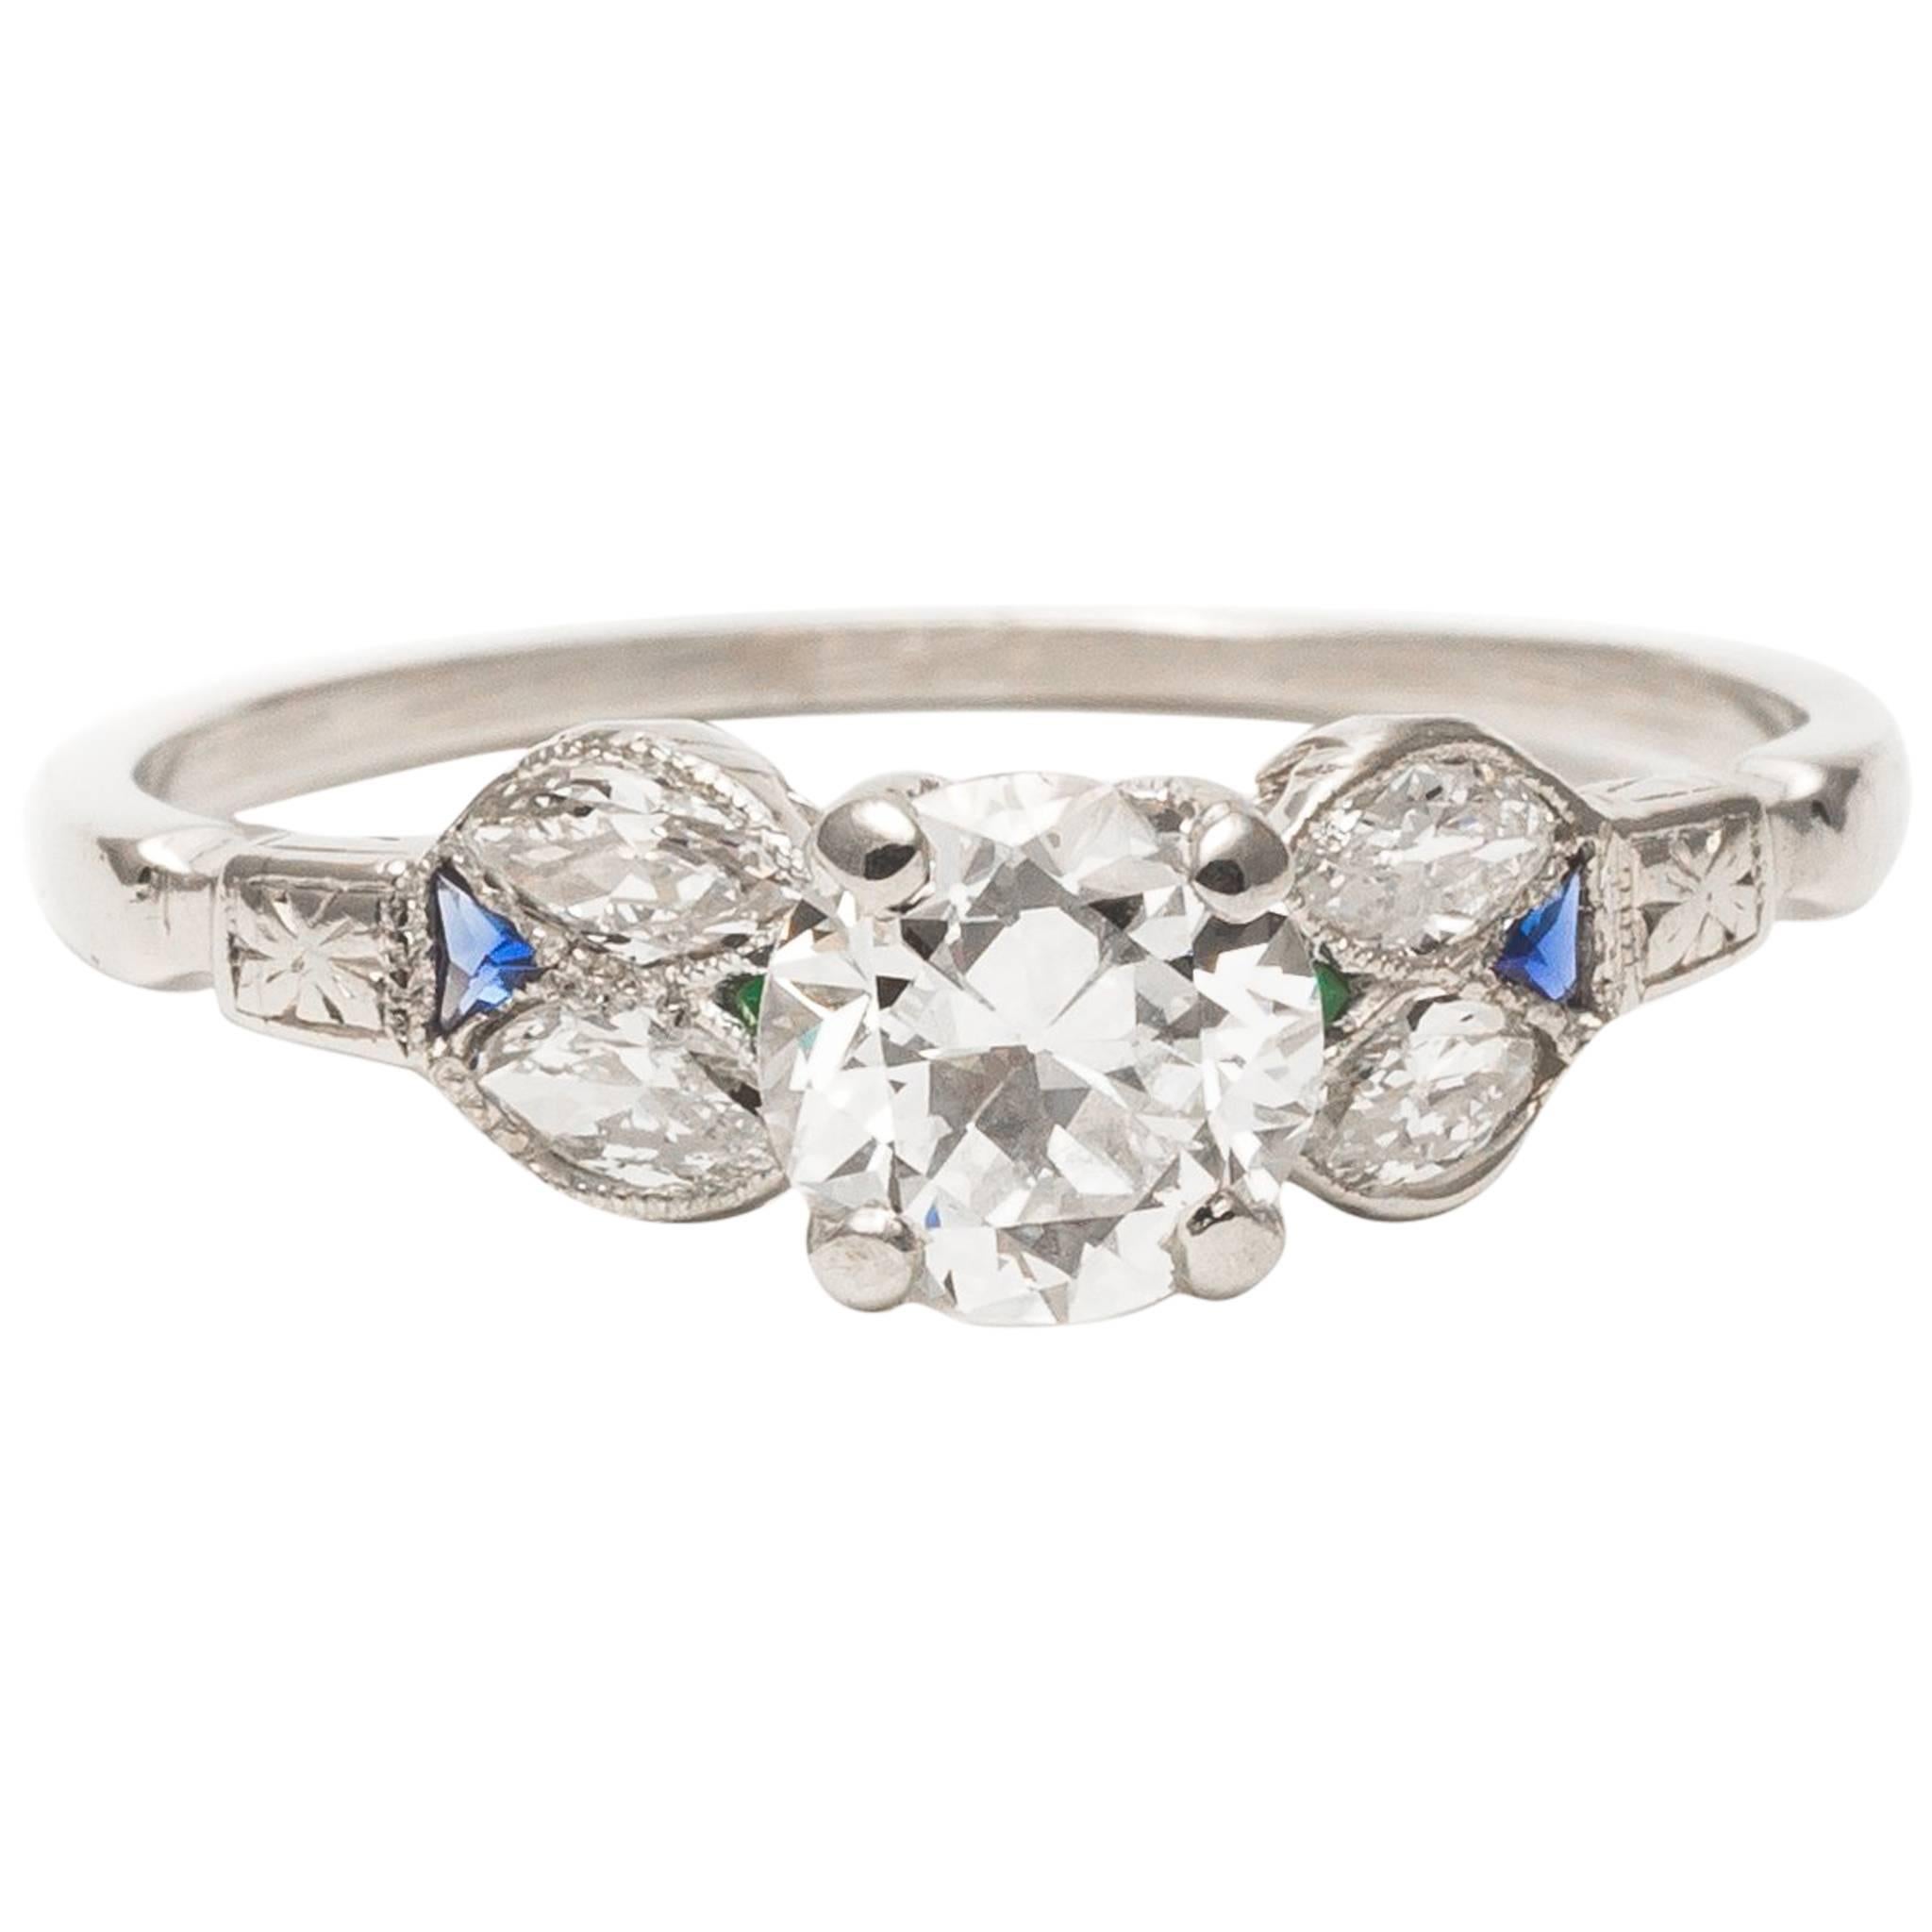 A beautiful original art deco period diamond engagement ring in platinum.  Centered by a high quality antique European cut diamond this ring features a pair of trillion cut sapphires and emeralds along with accenting marquise shaped diamonds.

Of